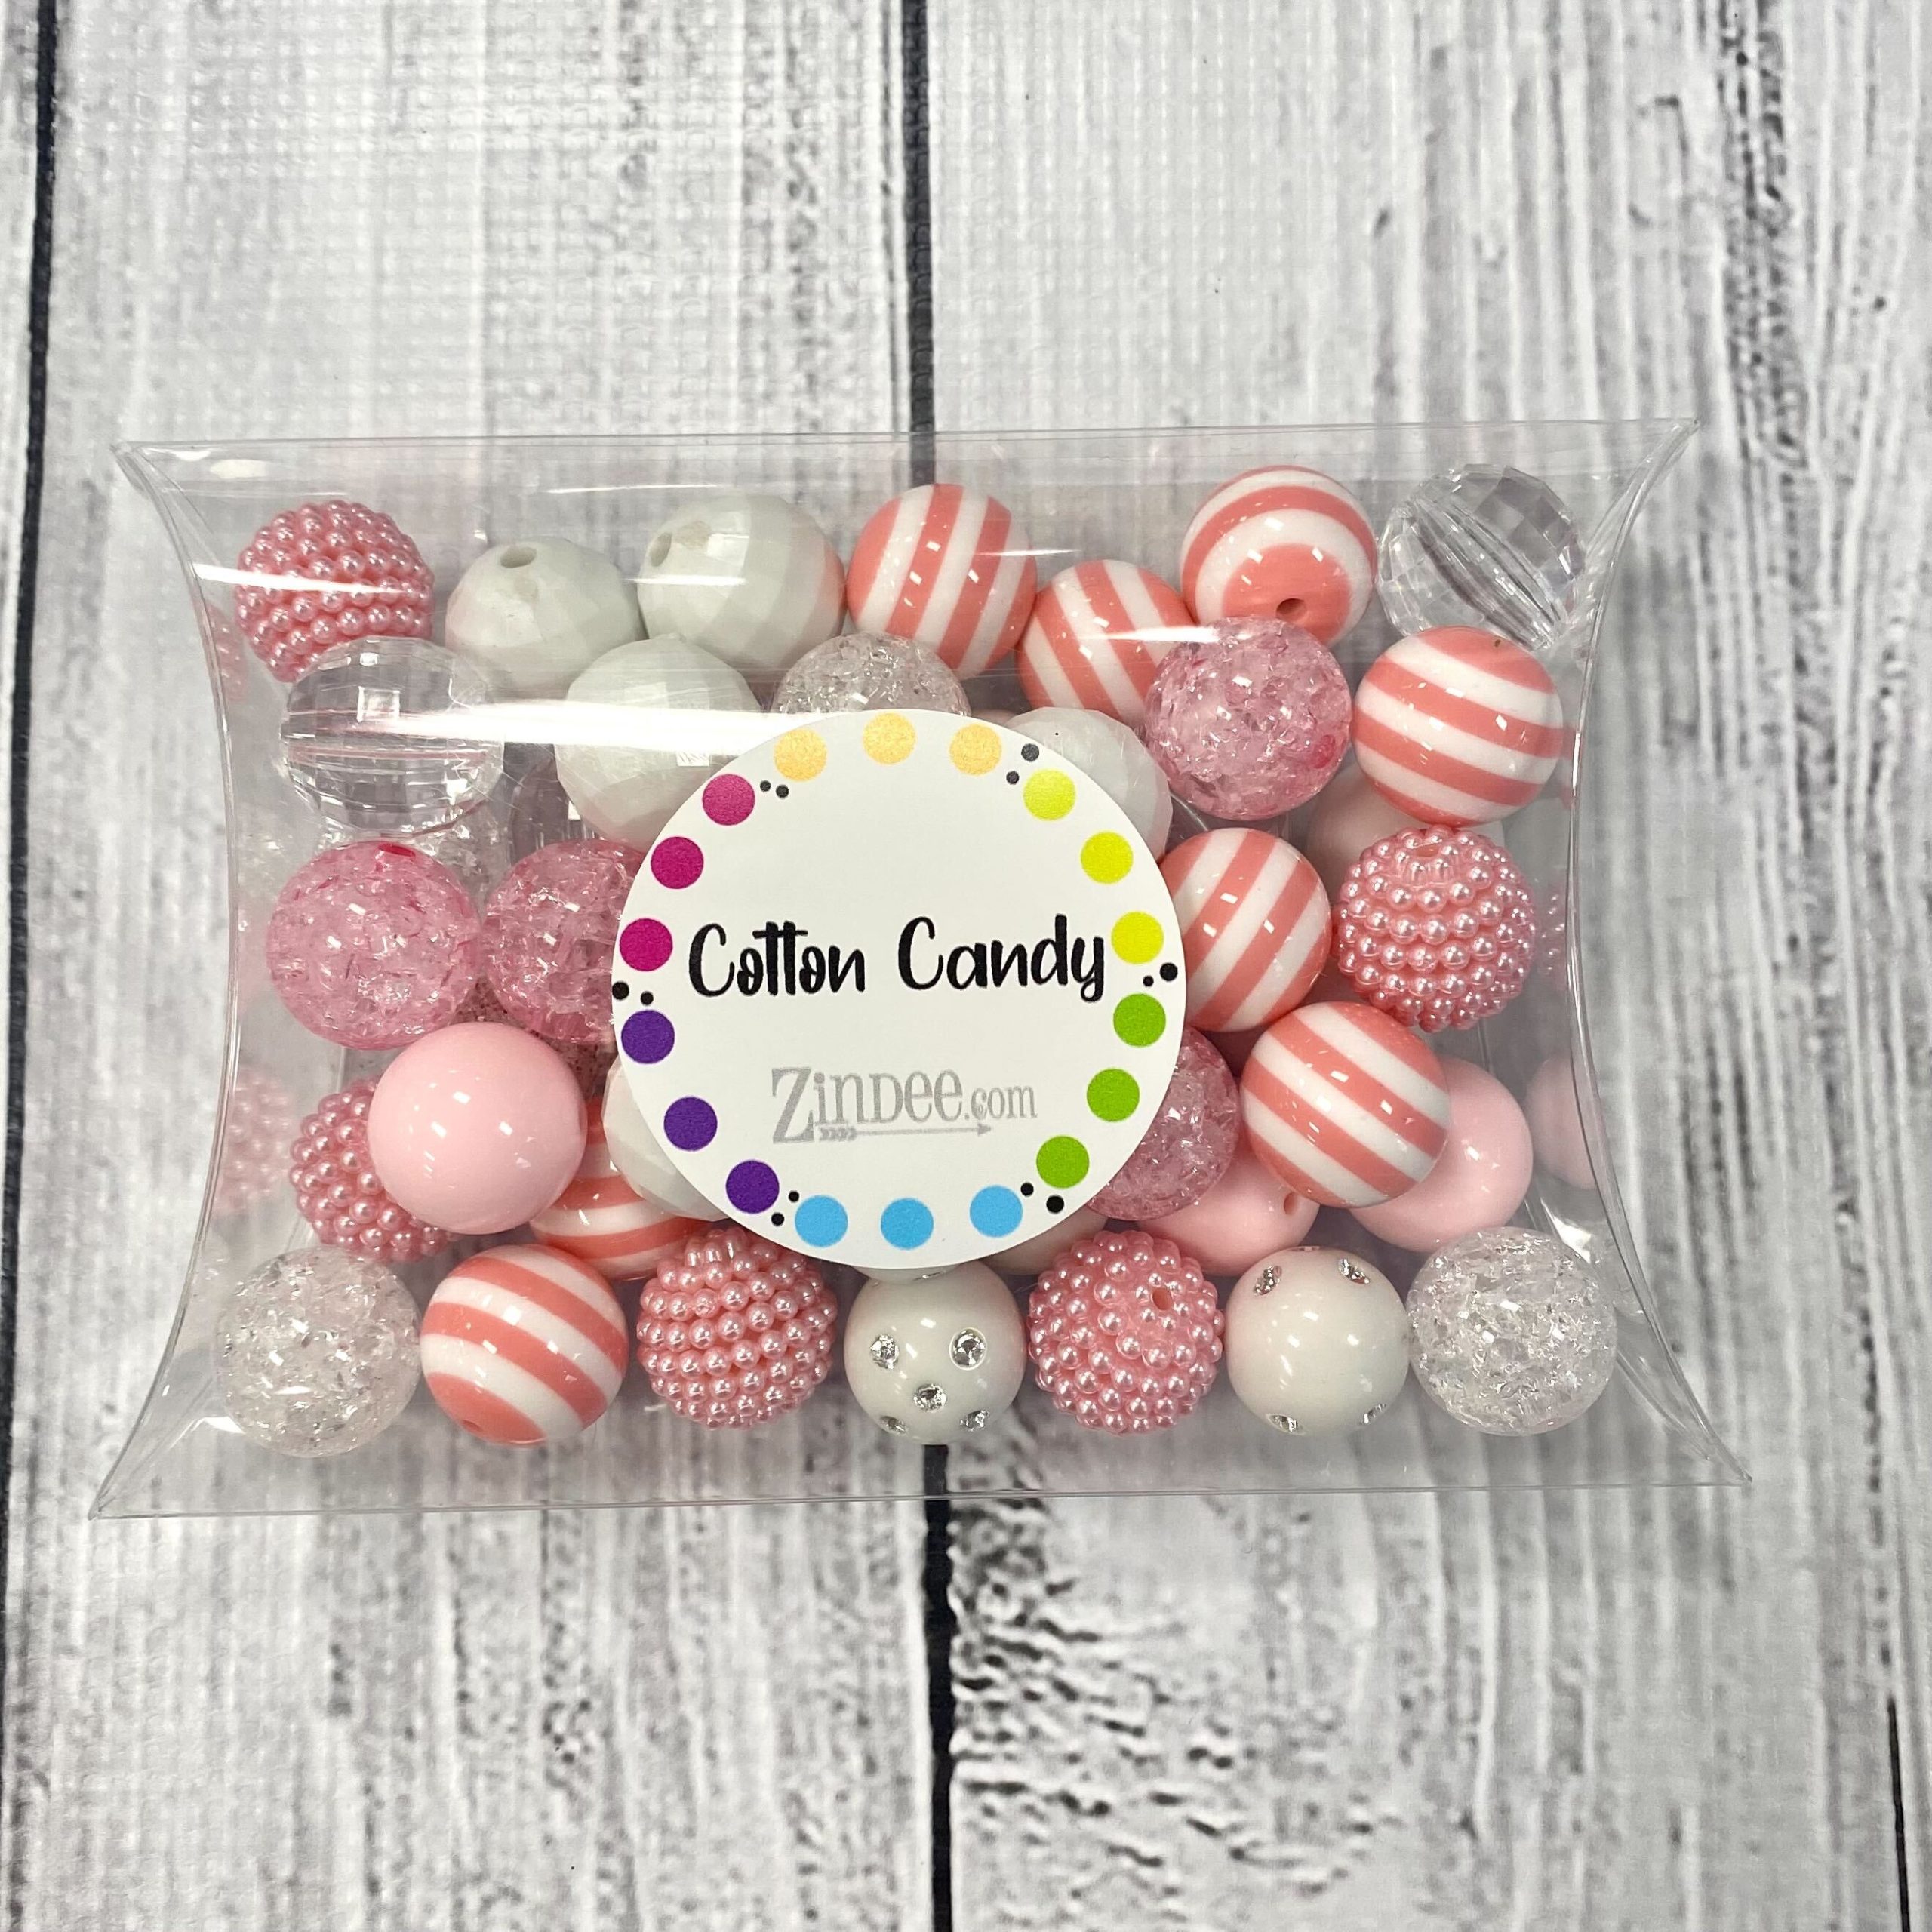 Cotton Candy (Beads) 48 pack –